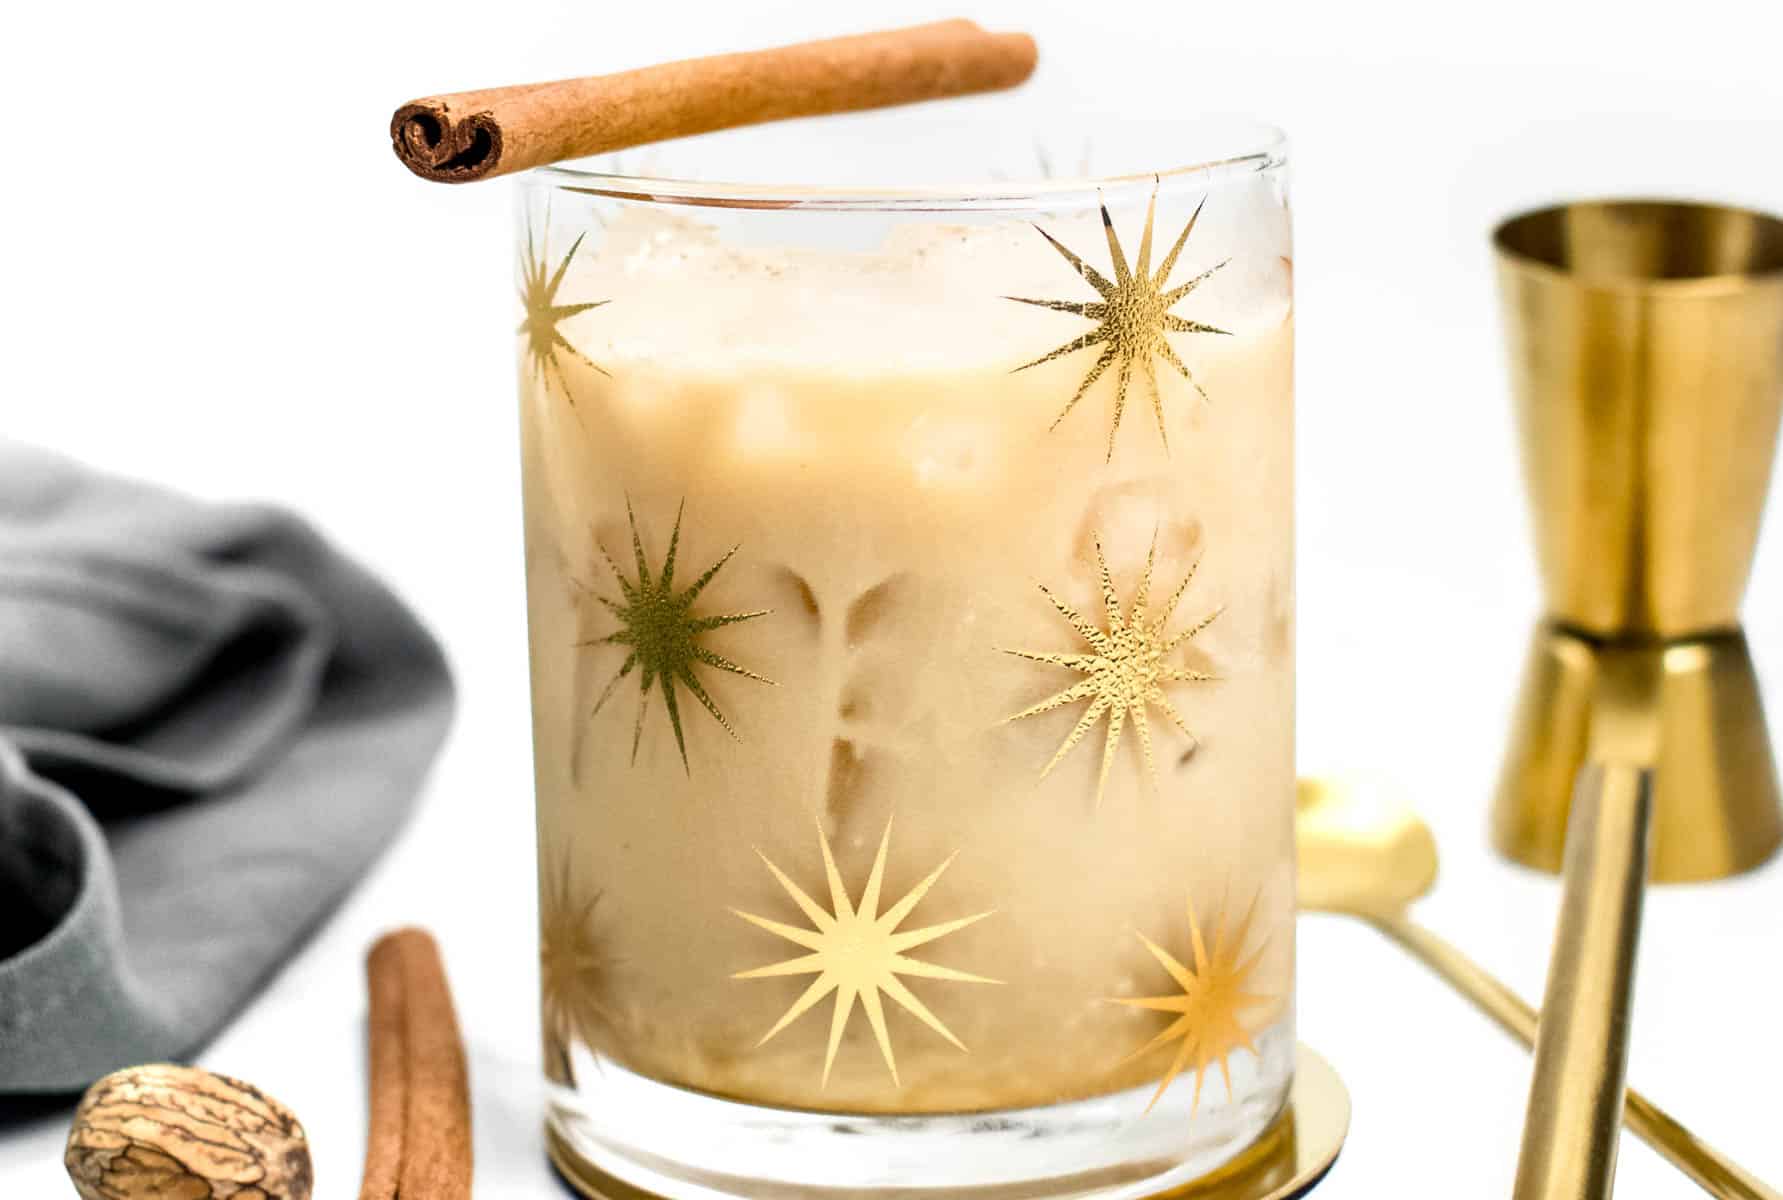 A glass of eggnog cocktail with cinnamon sticks and nutmeg.